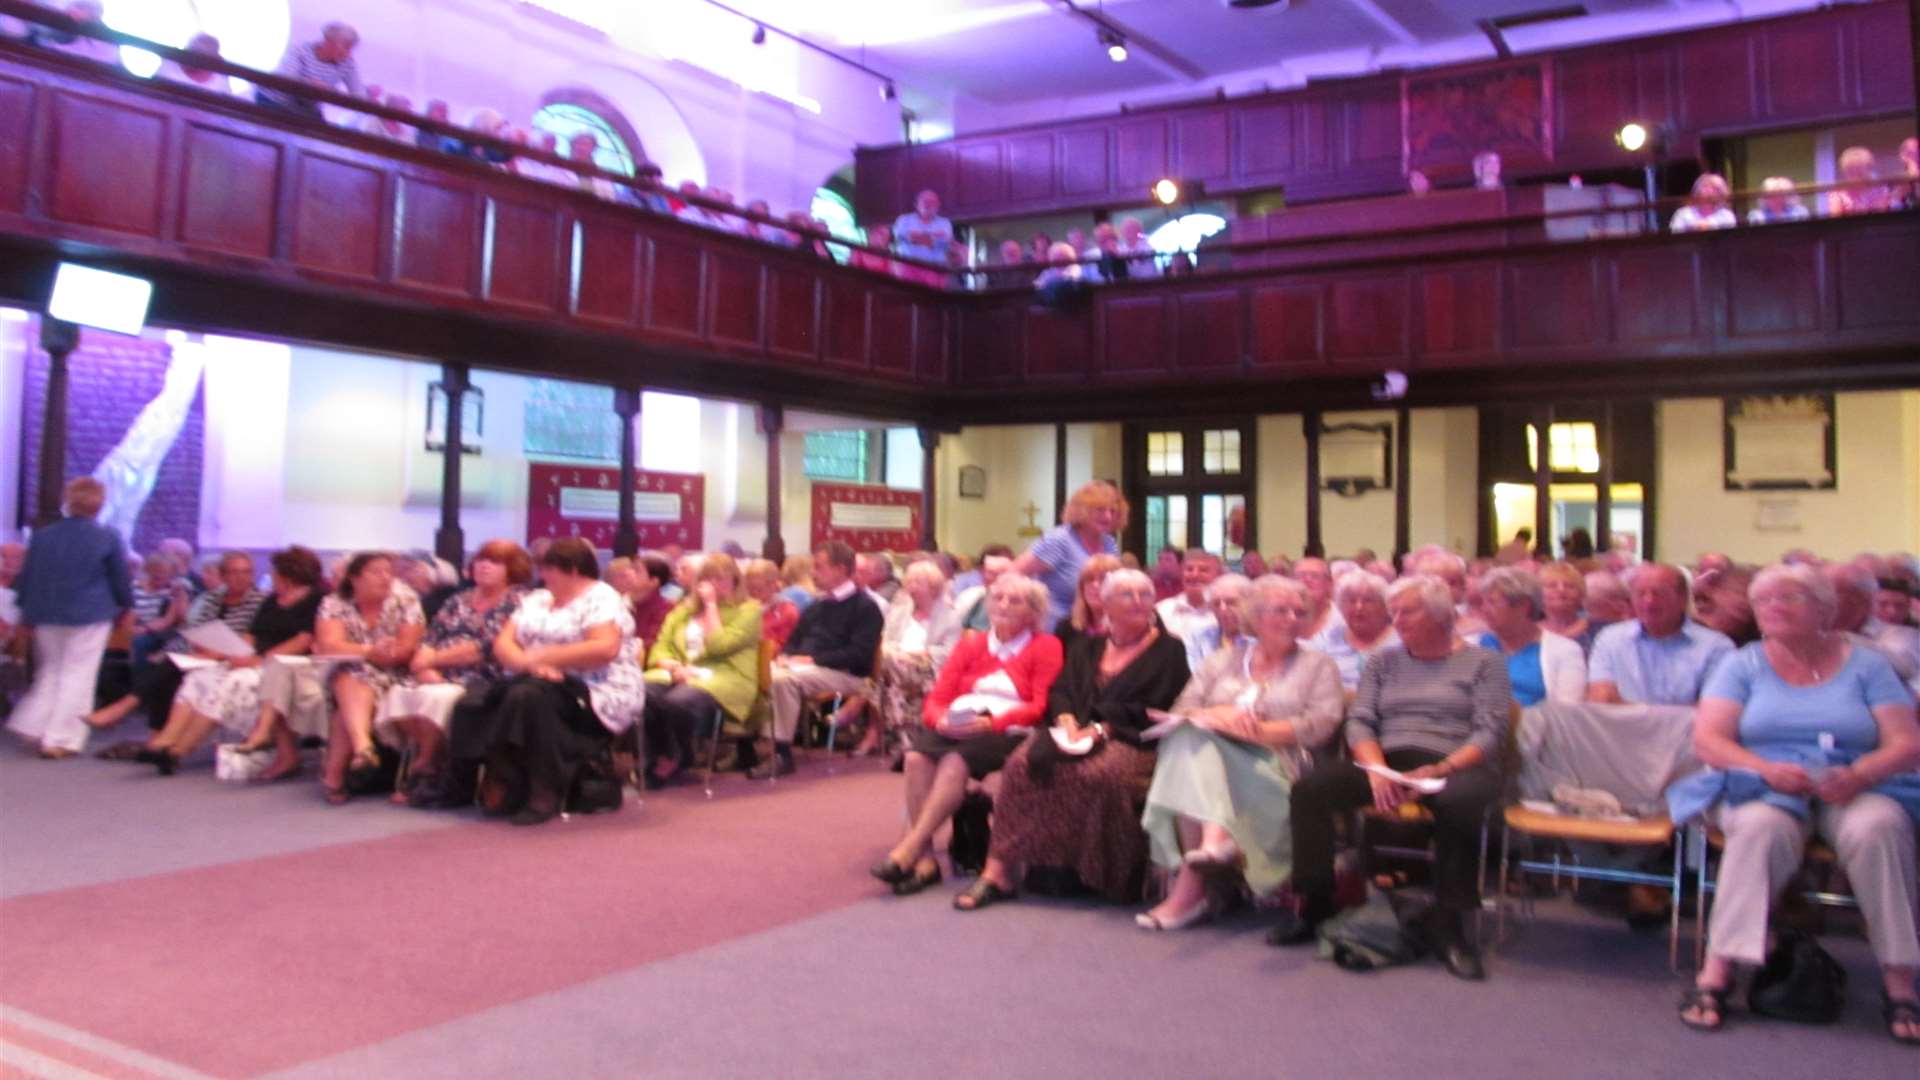 The meeting was packed to discuss the future of Deal hospital